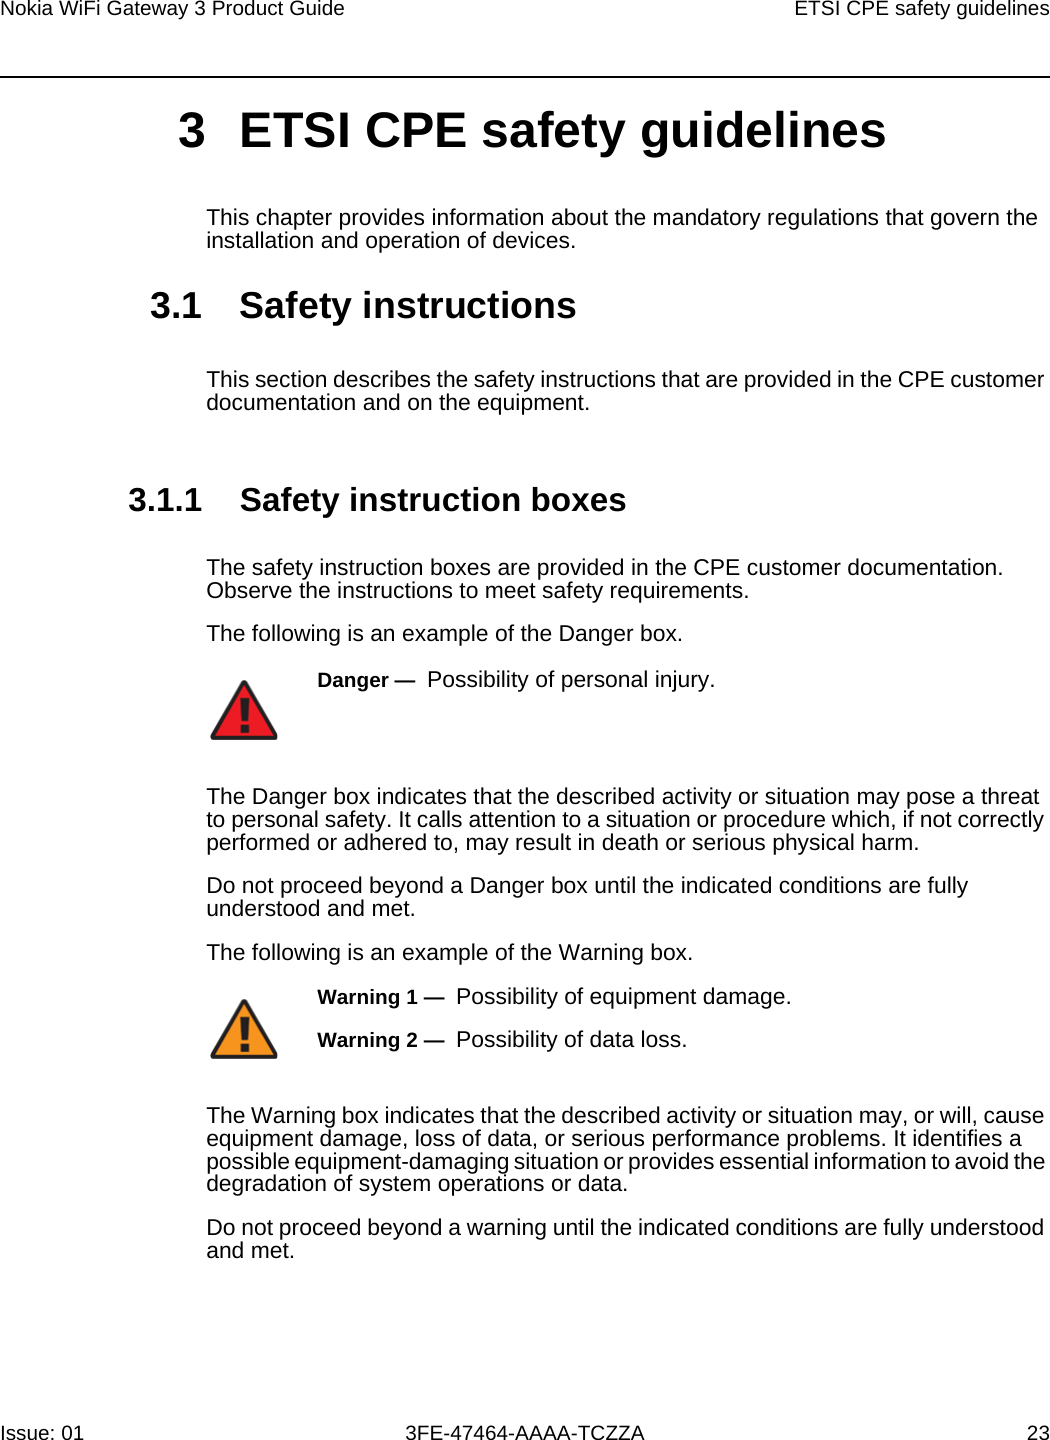 Nokia WiFi Gateway 3 Product Guide ETSI CPE safety guidelinesIssue: 01 3FE-47464-AAAA-TCZZA 23 3 ETSI CPE safety guidelinesThis chapter provides information about the mandatory regulations that govern the installation and operation of devices.3.1 Safety instructionsThis section describes the safety instructions that are provided in the CPE customer documentation and on the equipment.3.1.1 Safety instruction boxesThe safety instruction boxes are provided in the CPE customer documentation. Observe the instructions to meet safety requirements.The following is an example of the Danger box.The Danger box indicates that the described activity or situation may pose a threat to personal safety. It calls attention to a situation or procedure which, if not correctly performed or adhered to, may result in death or serious physical harm. Do not proceed beyond a Danger box until the indicated conditions are fully understood and met.The following is an example of the Warning box.The Warning box indicates that the described activity or situation may, or will, cause equipment damage, loss of data, or serious performance problems. It identifies a possible equipment-damaging situation or provides essential information to avoid the degradation of system operations or data.Do not proceed beyond a warning until the indicated conditions are fully understood and met.Danger —  Possibility of personal injury. Warning 1 —  Possibility of equipment damage.Warning 2 —  Possibility of data loss.